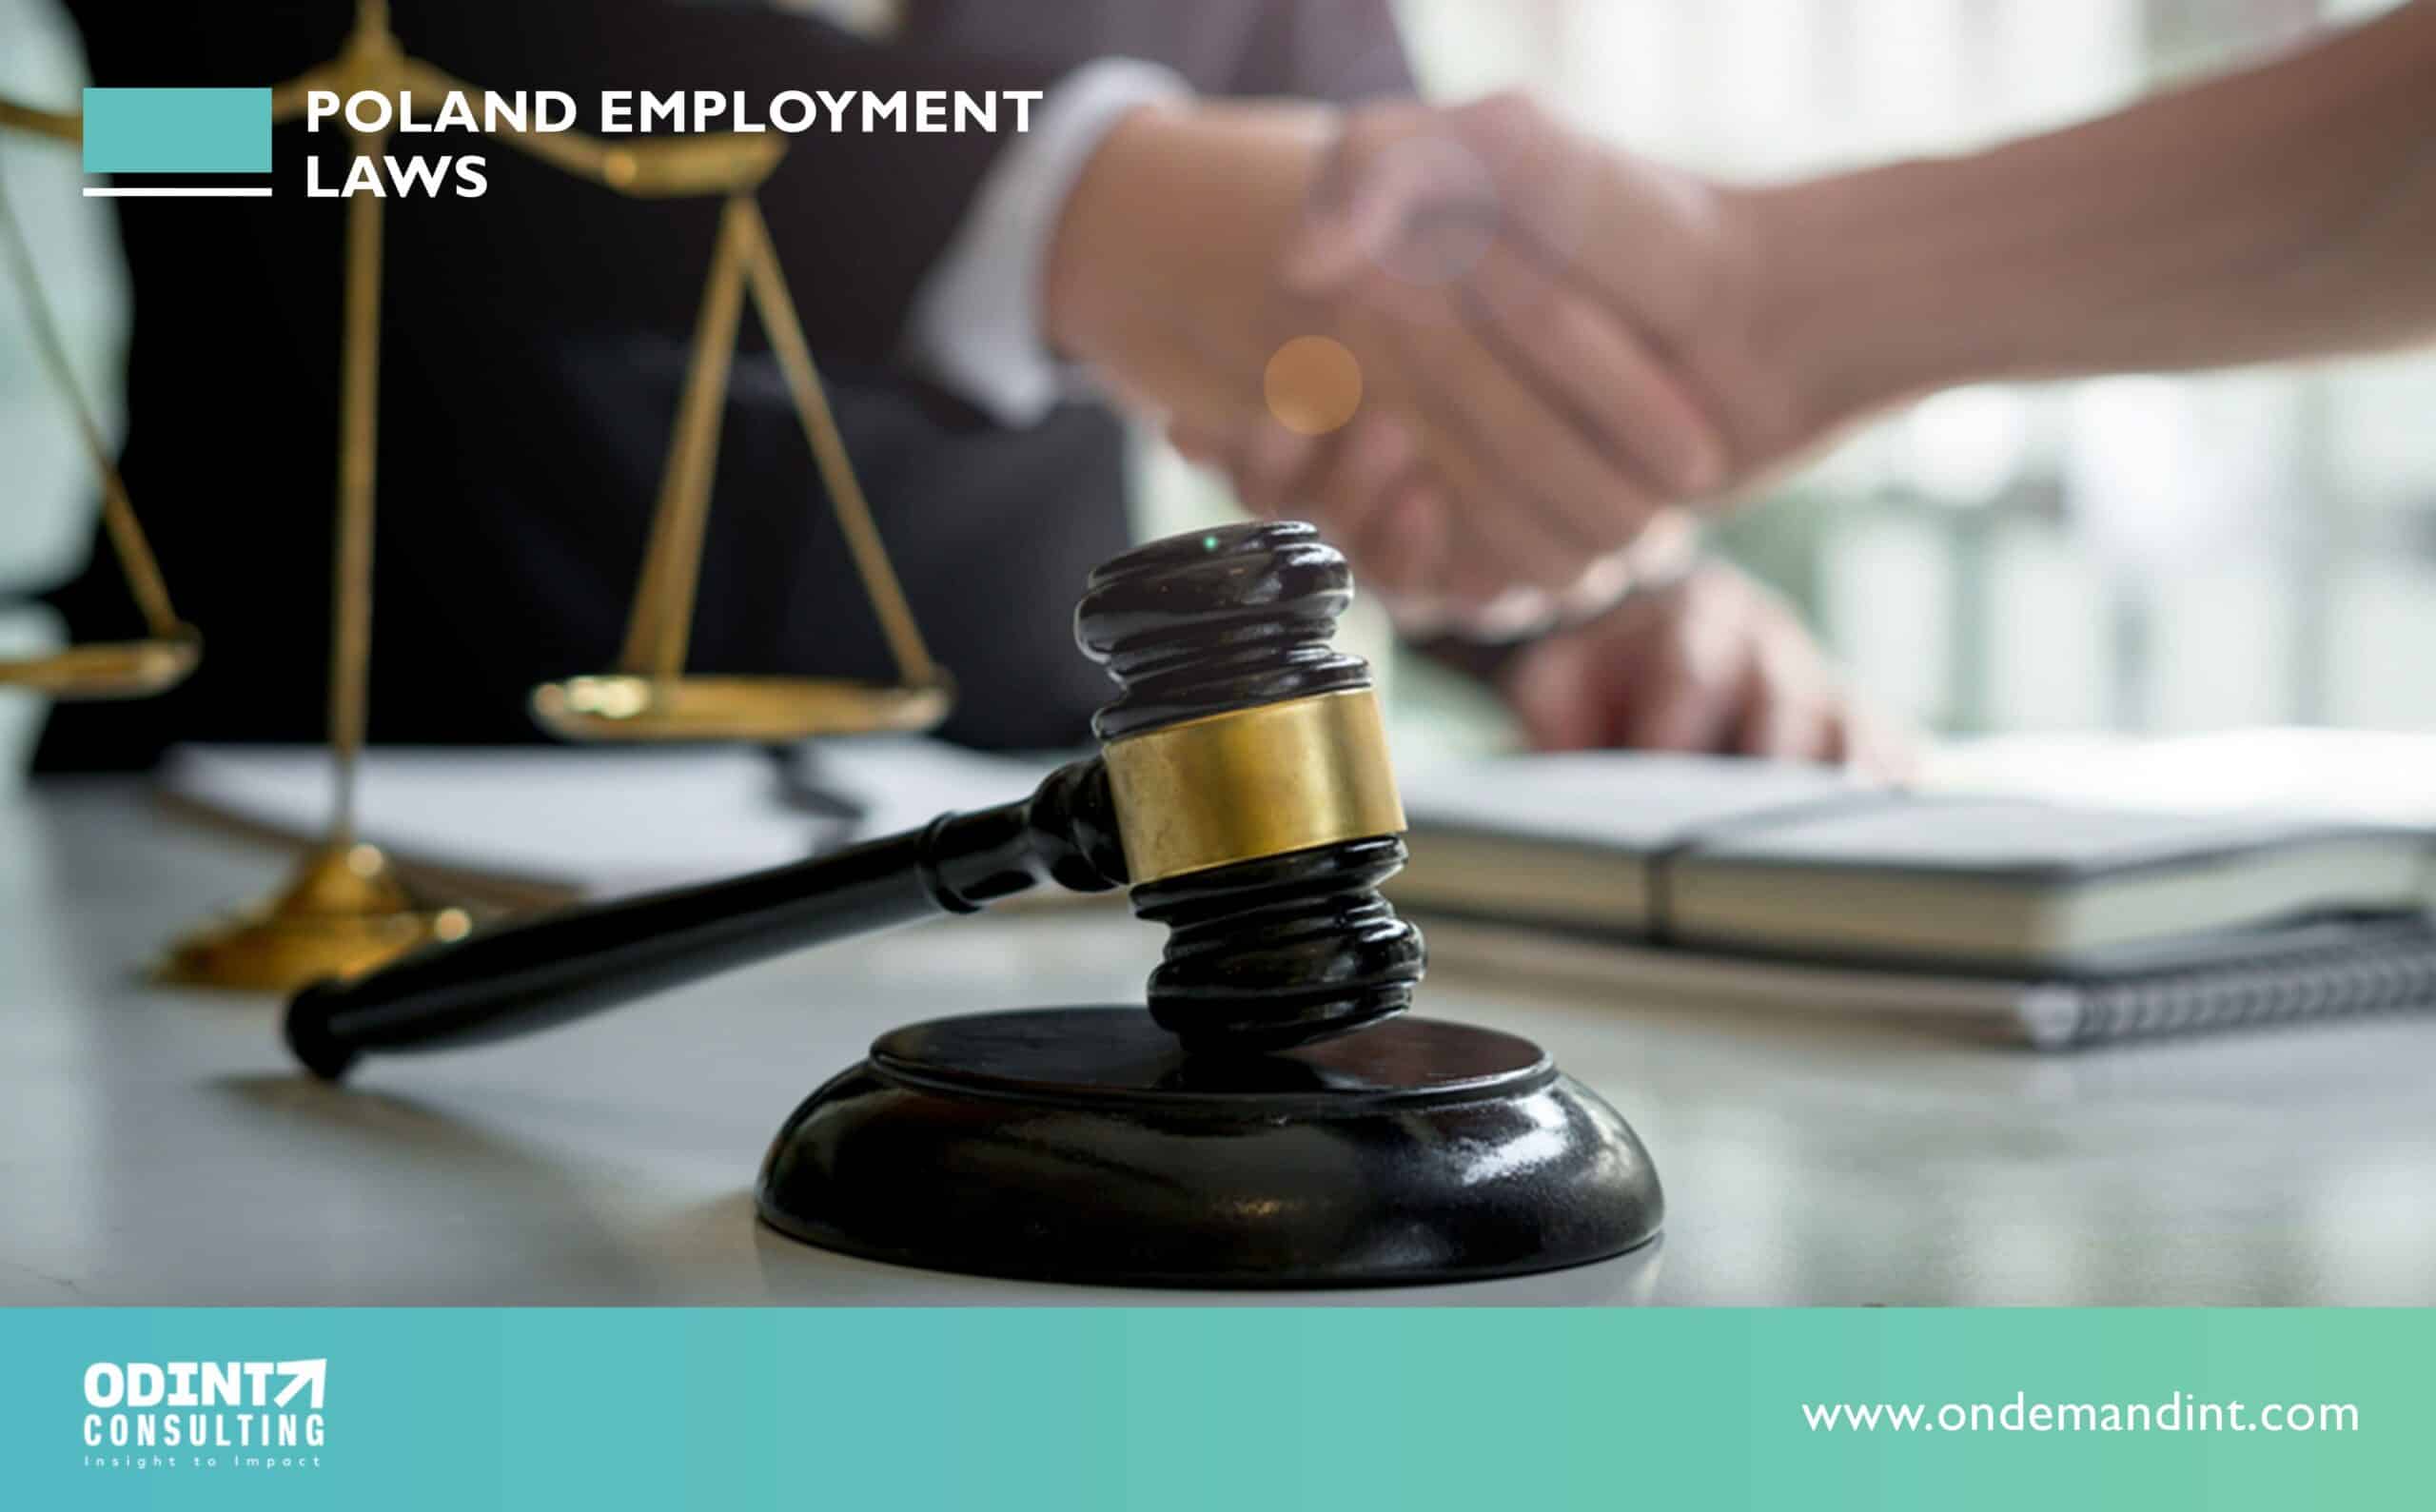 Poland Employment Laws: Brief Overview